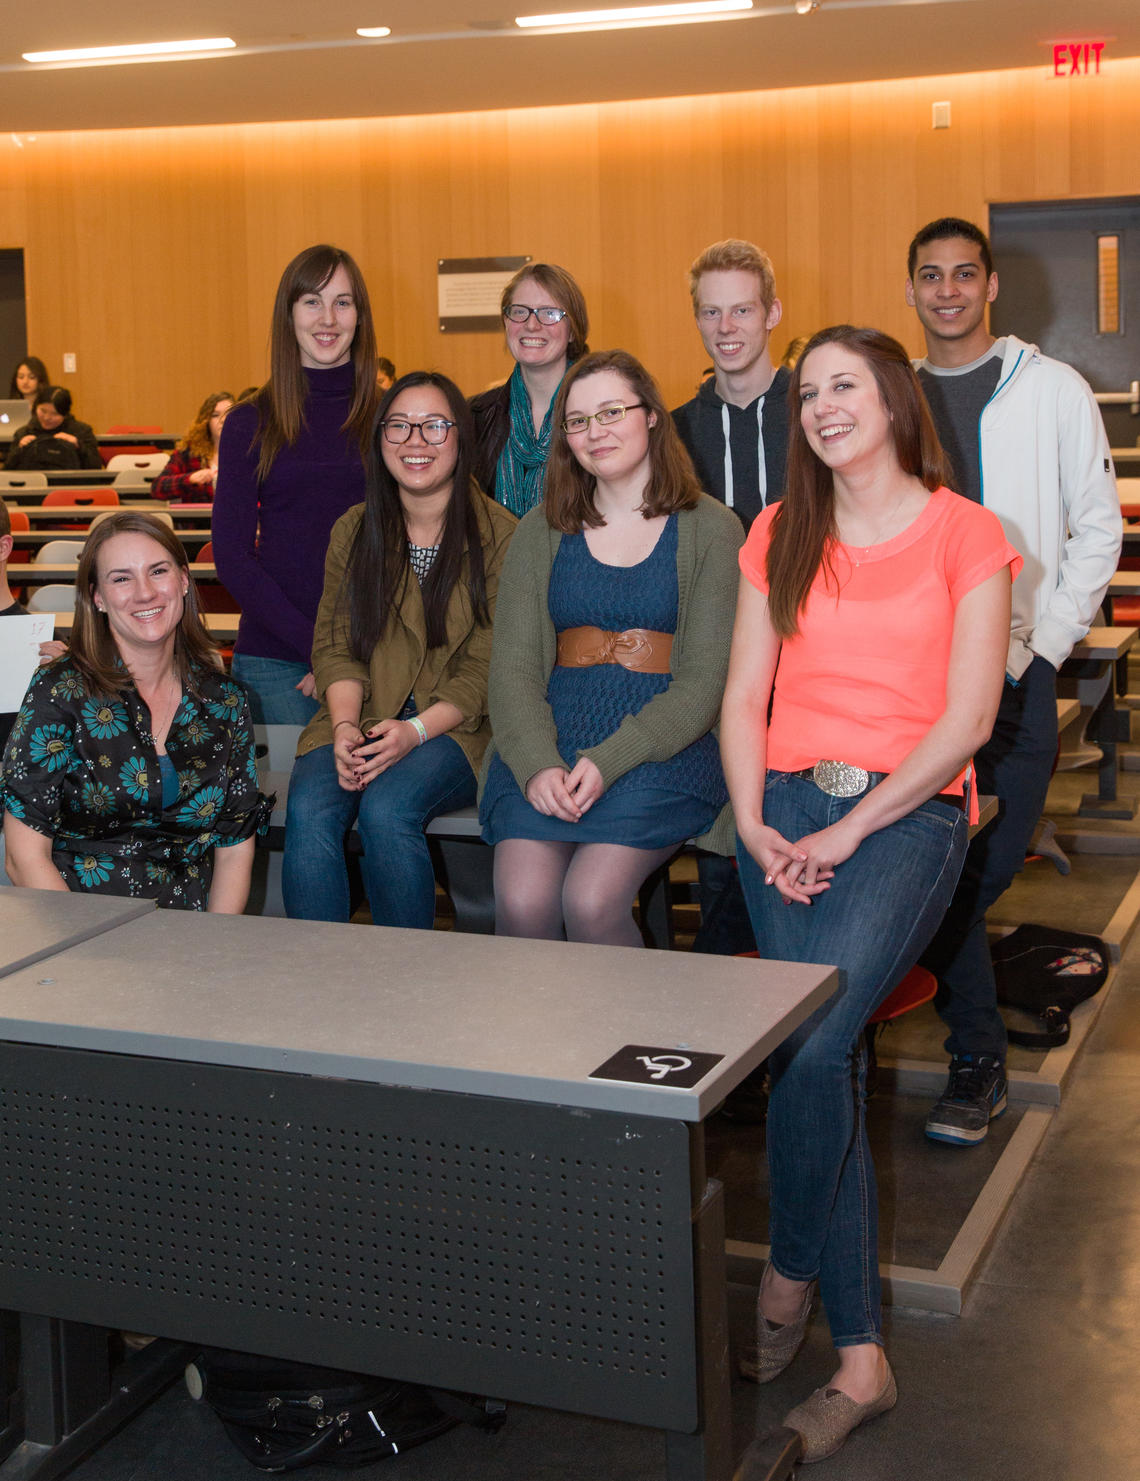 Front row, from left: Kyla Flanagan, an instructor in the Department of Biological Sciences, and peer mentors Megan Mah, Catharine Hillaby, Karen Shewchuk. Back row, from left, peer mentors Susan Anderson, Brittany Ahmad, Ben Webster, Getanshu Malik.